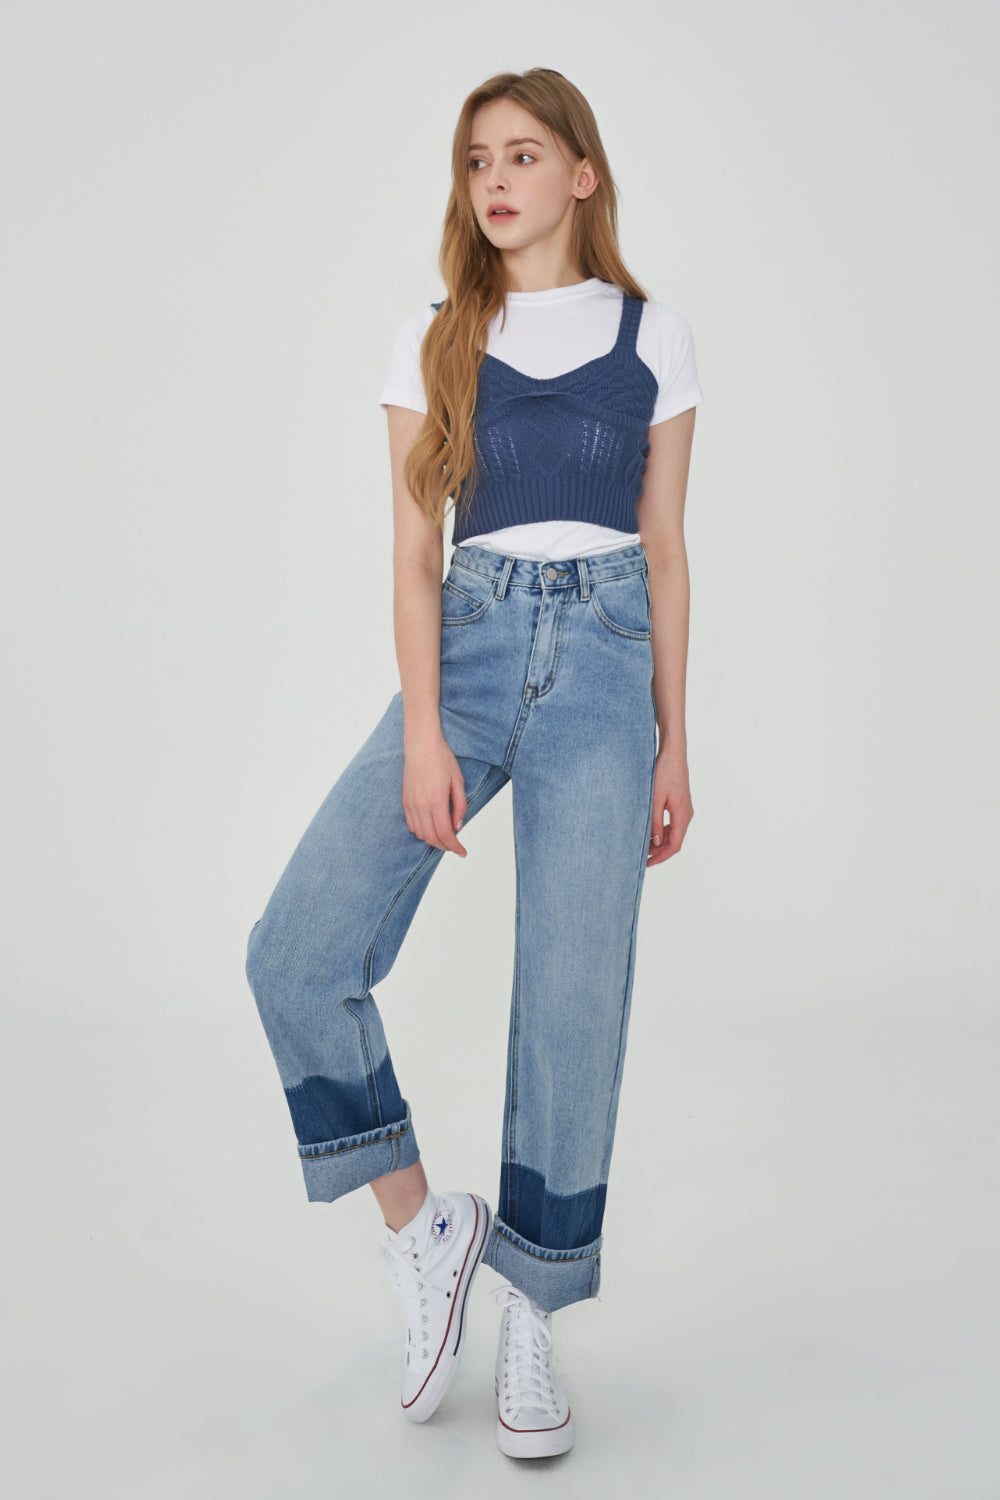 TWO TONE MIXED ROLL UP DENIM PANTS [6605]